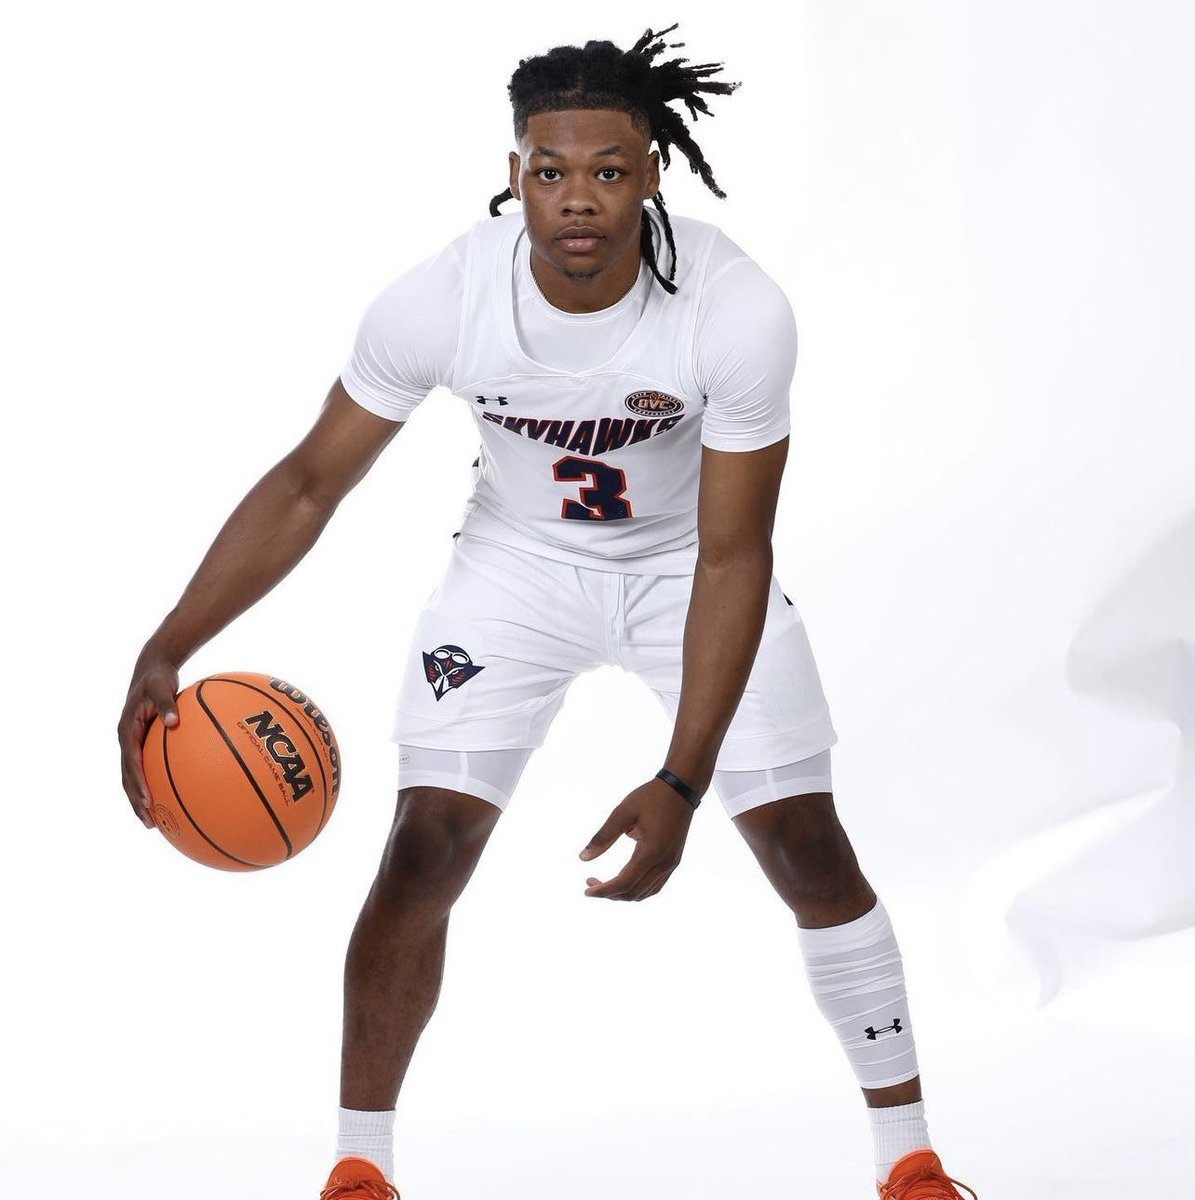 BREAKING: Here come the Tigers… Matt McMahon and Co. land a commitment from UT-Martin transfer Jordan Sears. The coveted guard averaged 21.6 points per game while shooting 43.2% from 3pt range. Sears was a Top 10 scorer in America during the 2023-24 season. Huge get for LSU.